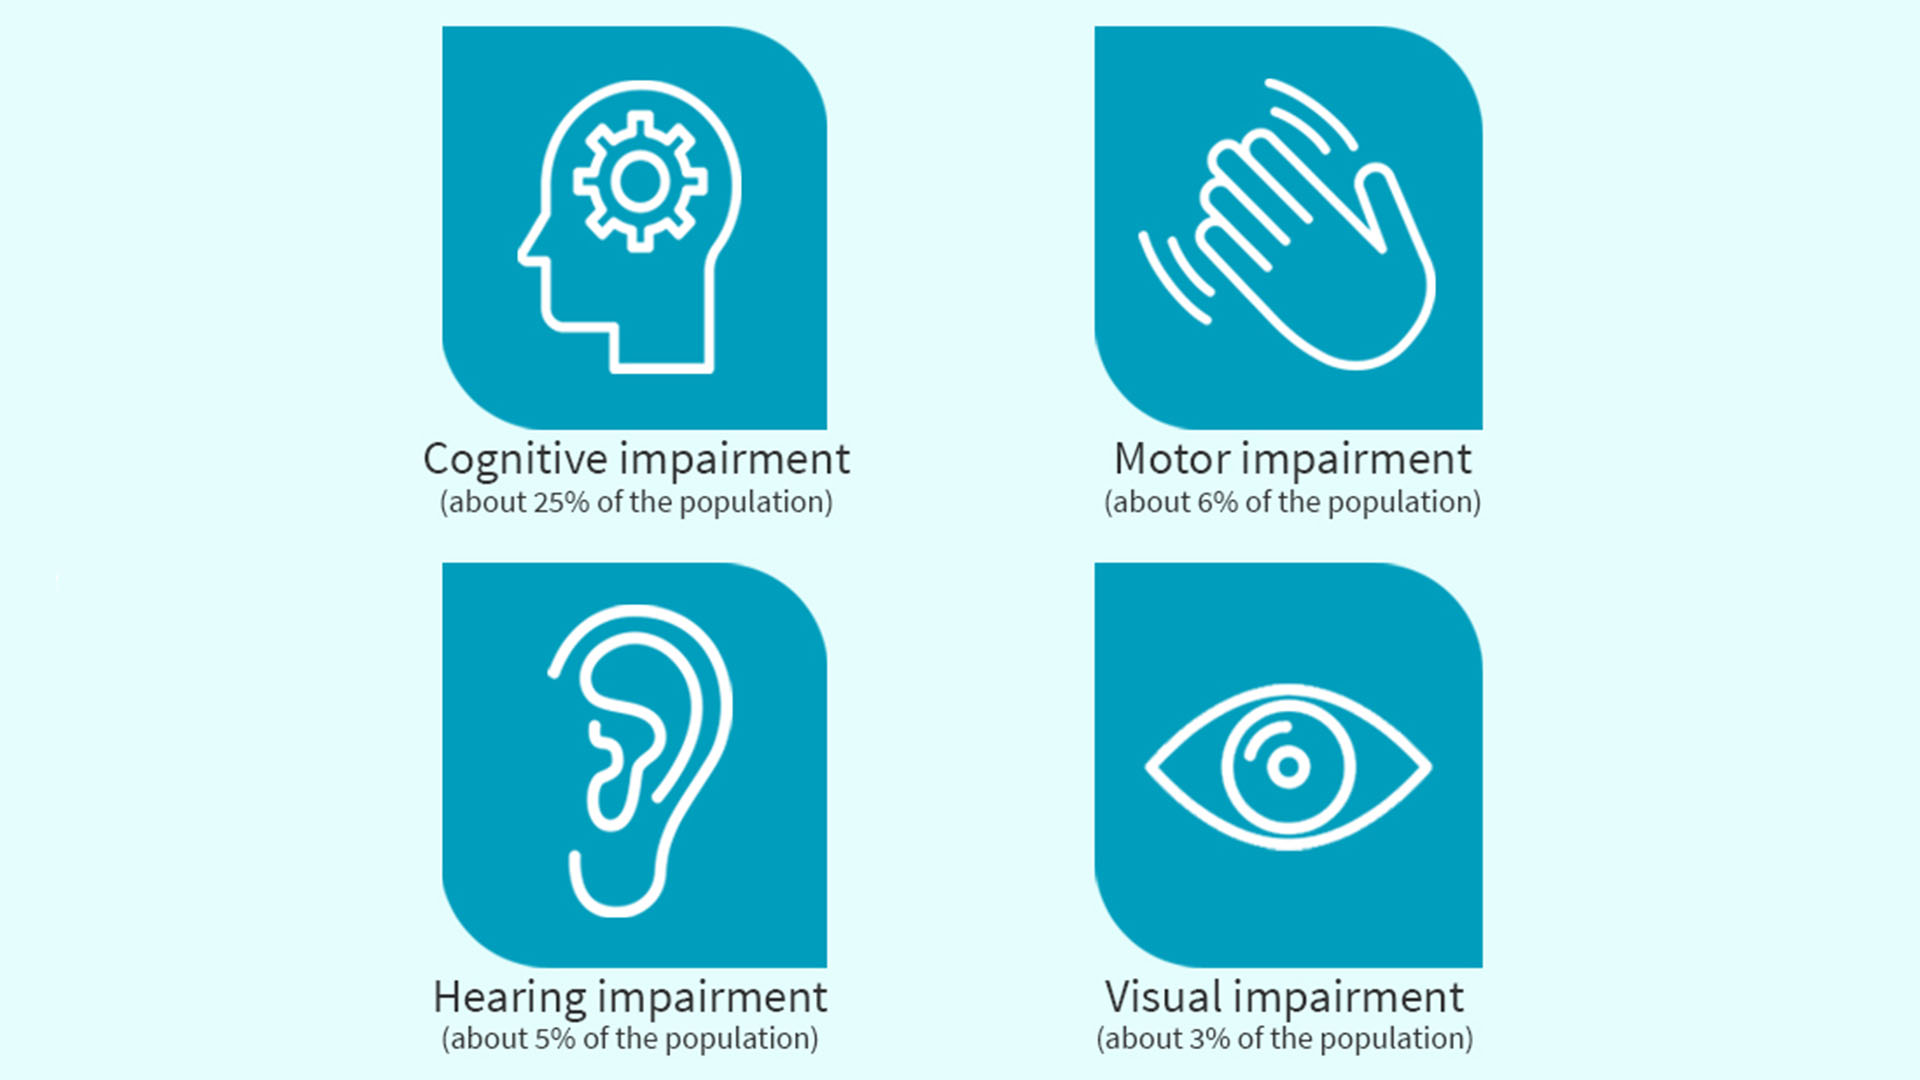 Cognitive impairment, about 25% of the population. Motor impairment, about 6% of the population. Hearing impairment, about 5% of the population. Visual impairment, about 3% of the population.